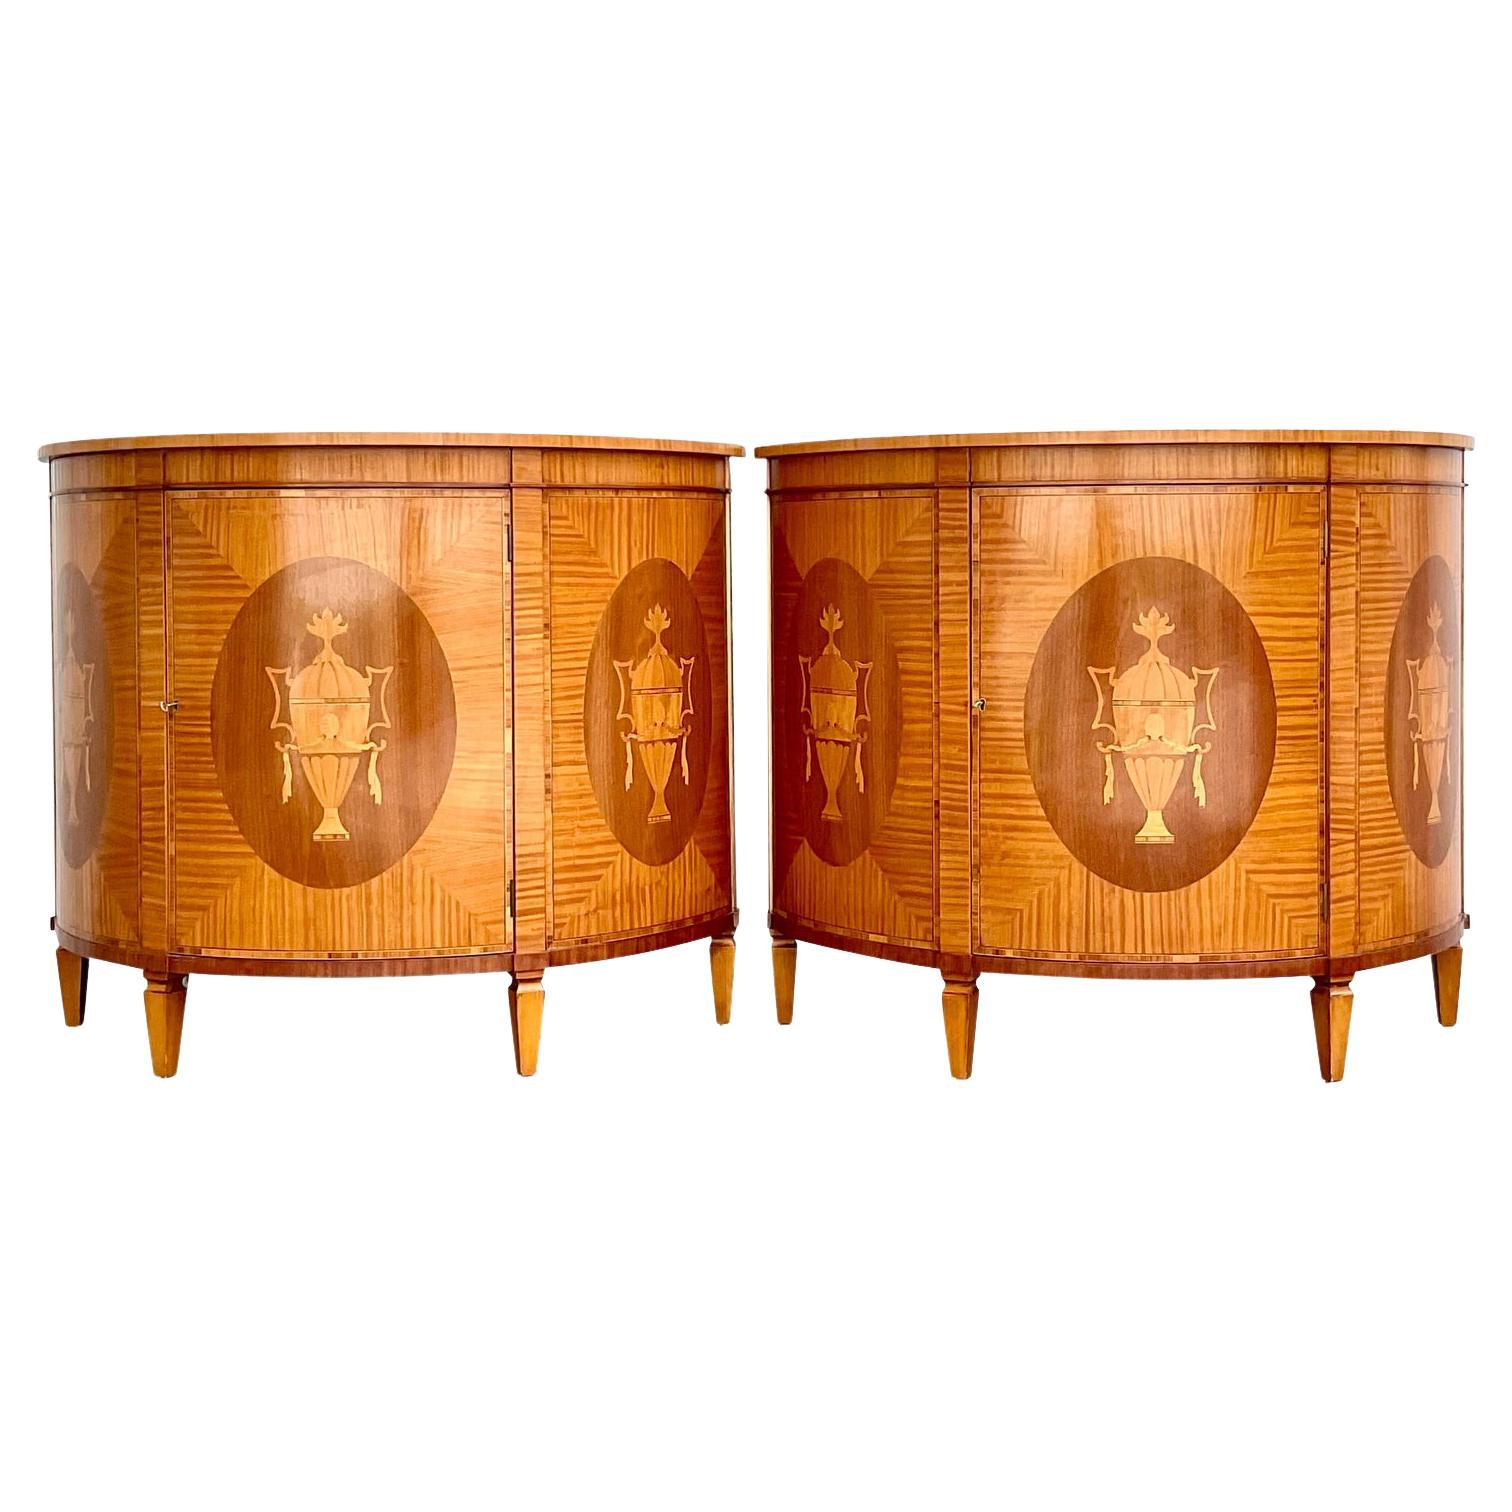 Fantastic Vintage Regency Marquetry Demilune Console Cabinets, a Pair